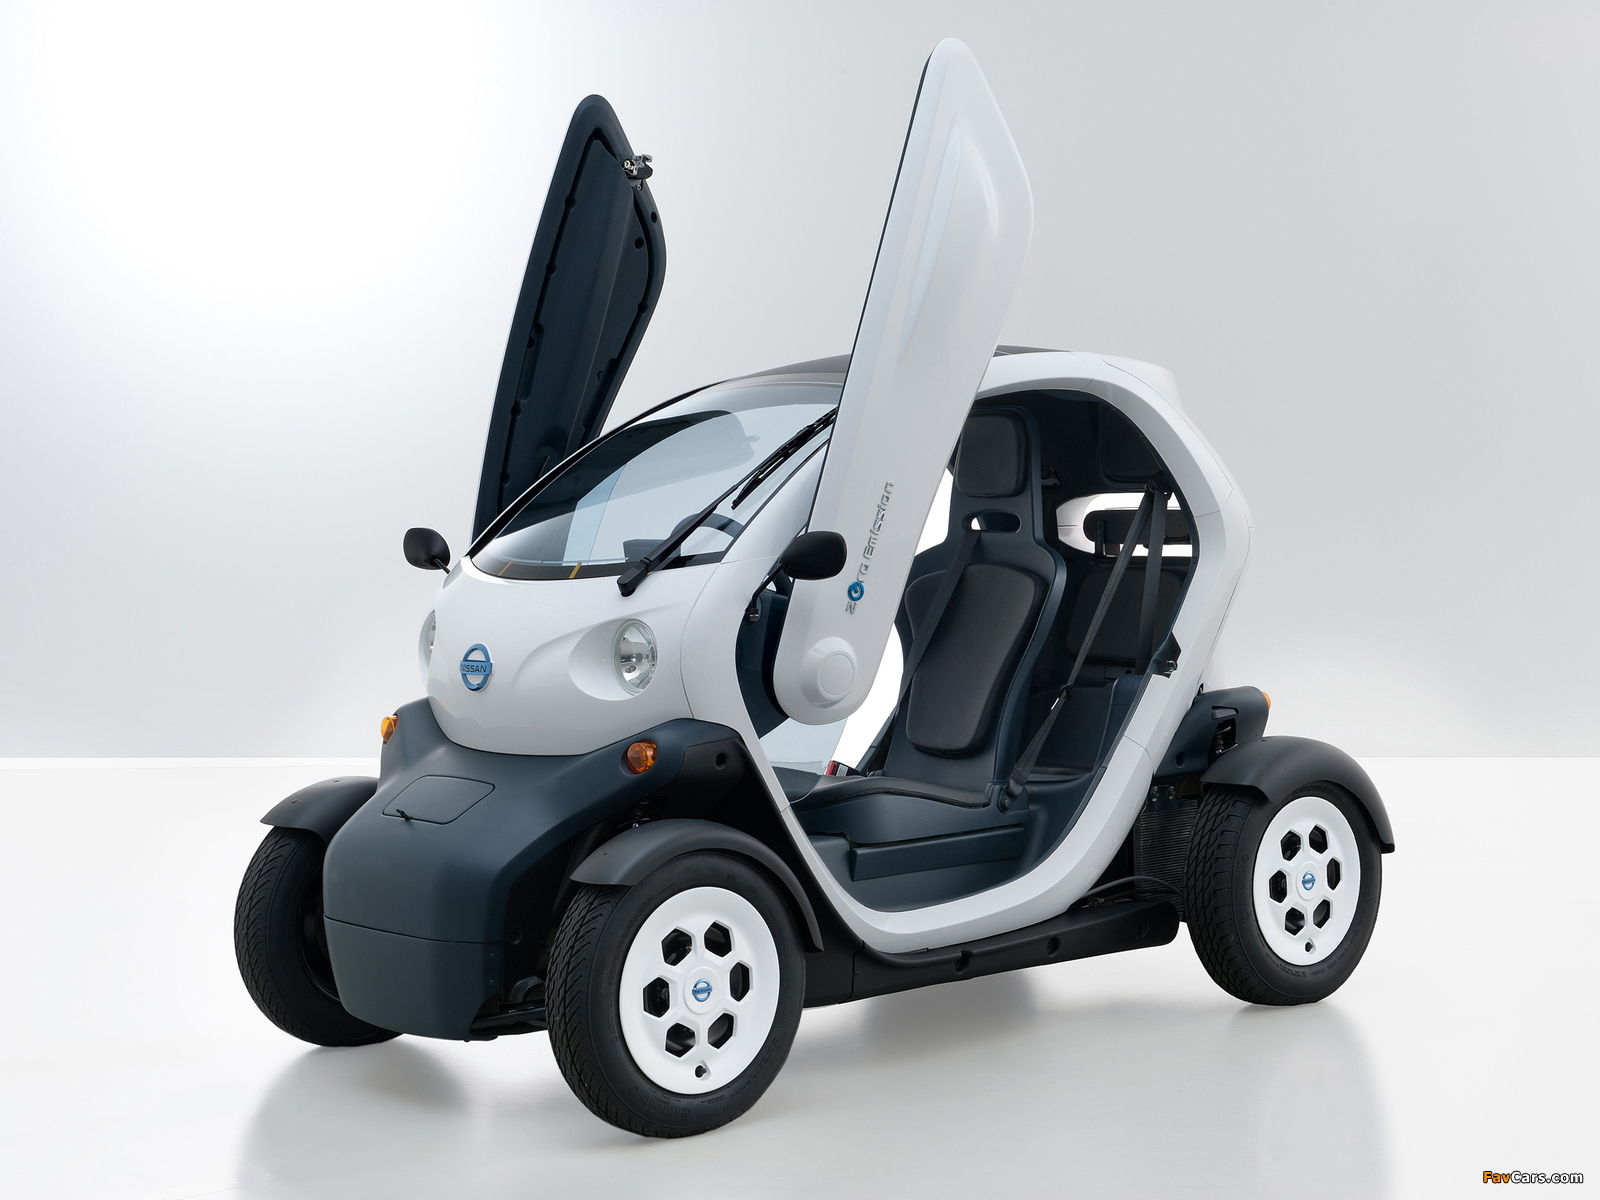 Nissan New Mobility Concept 2011 pictures (1600 x 1200)